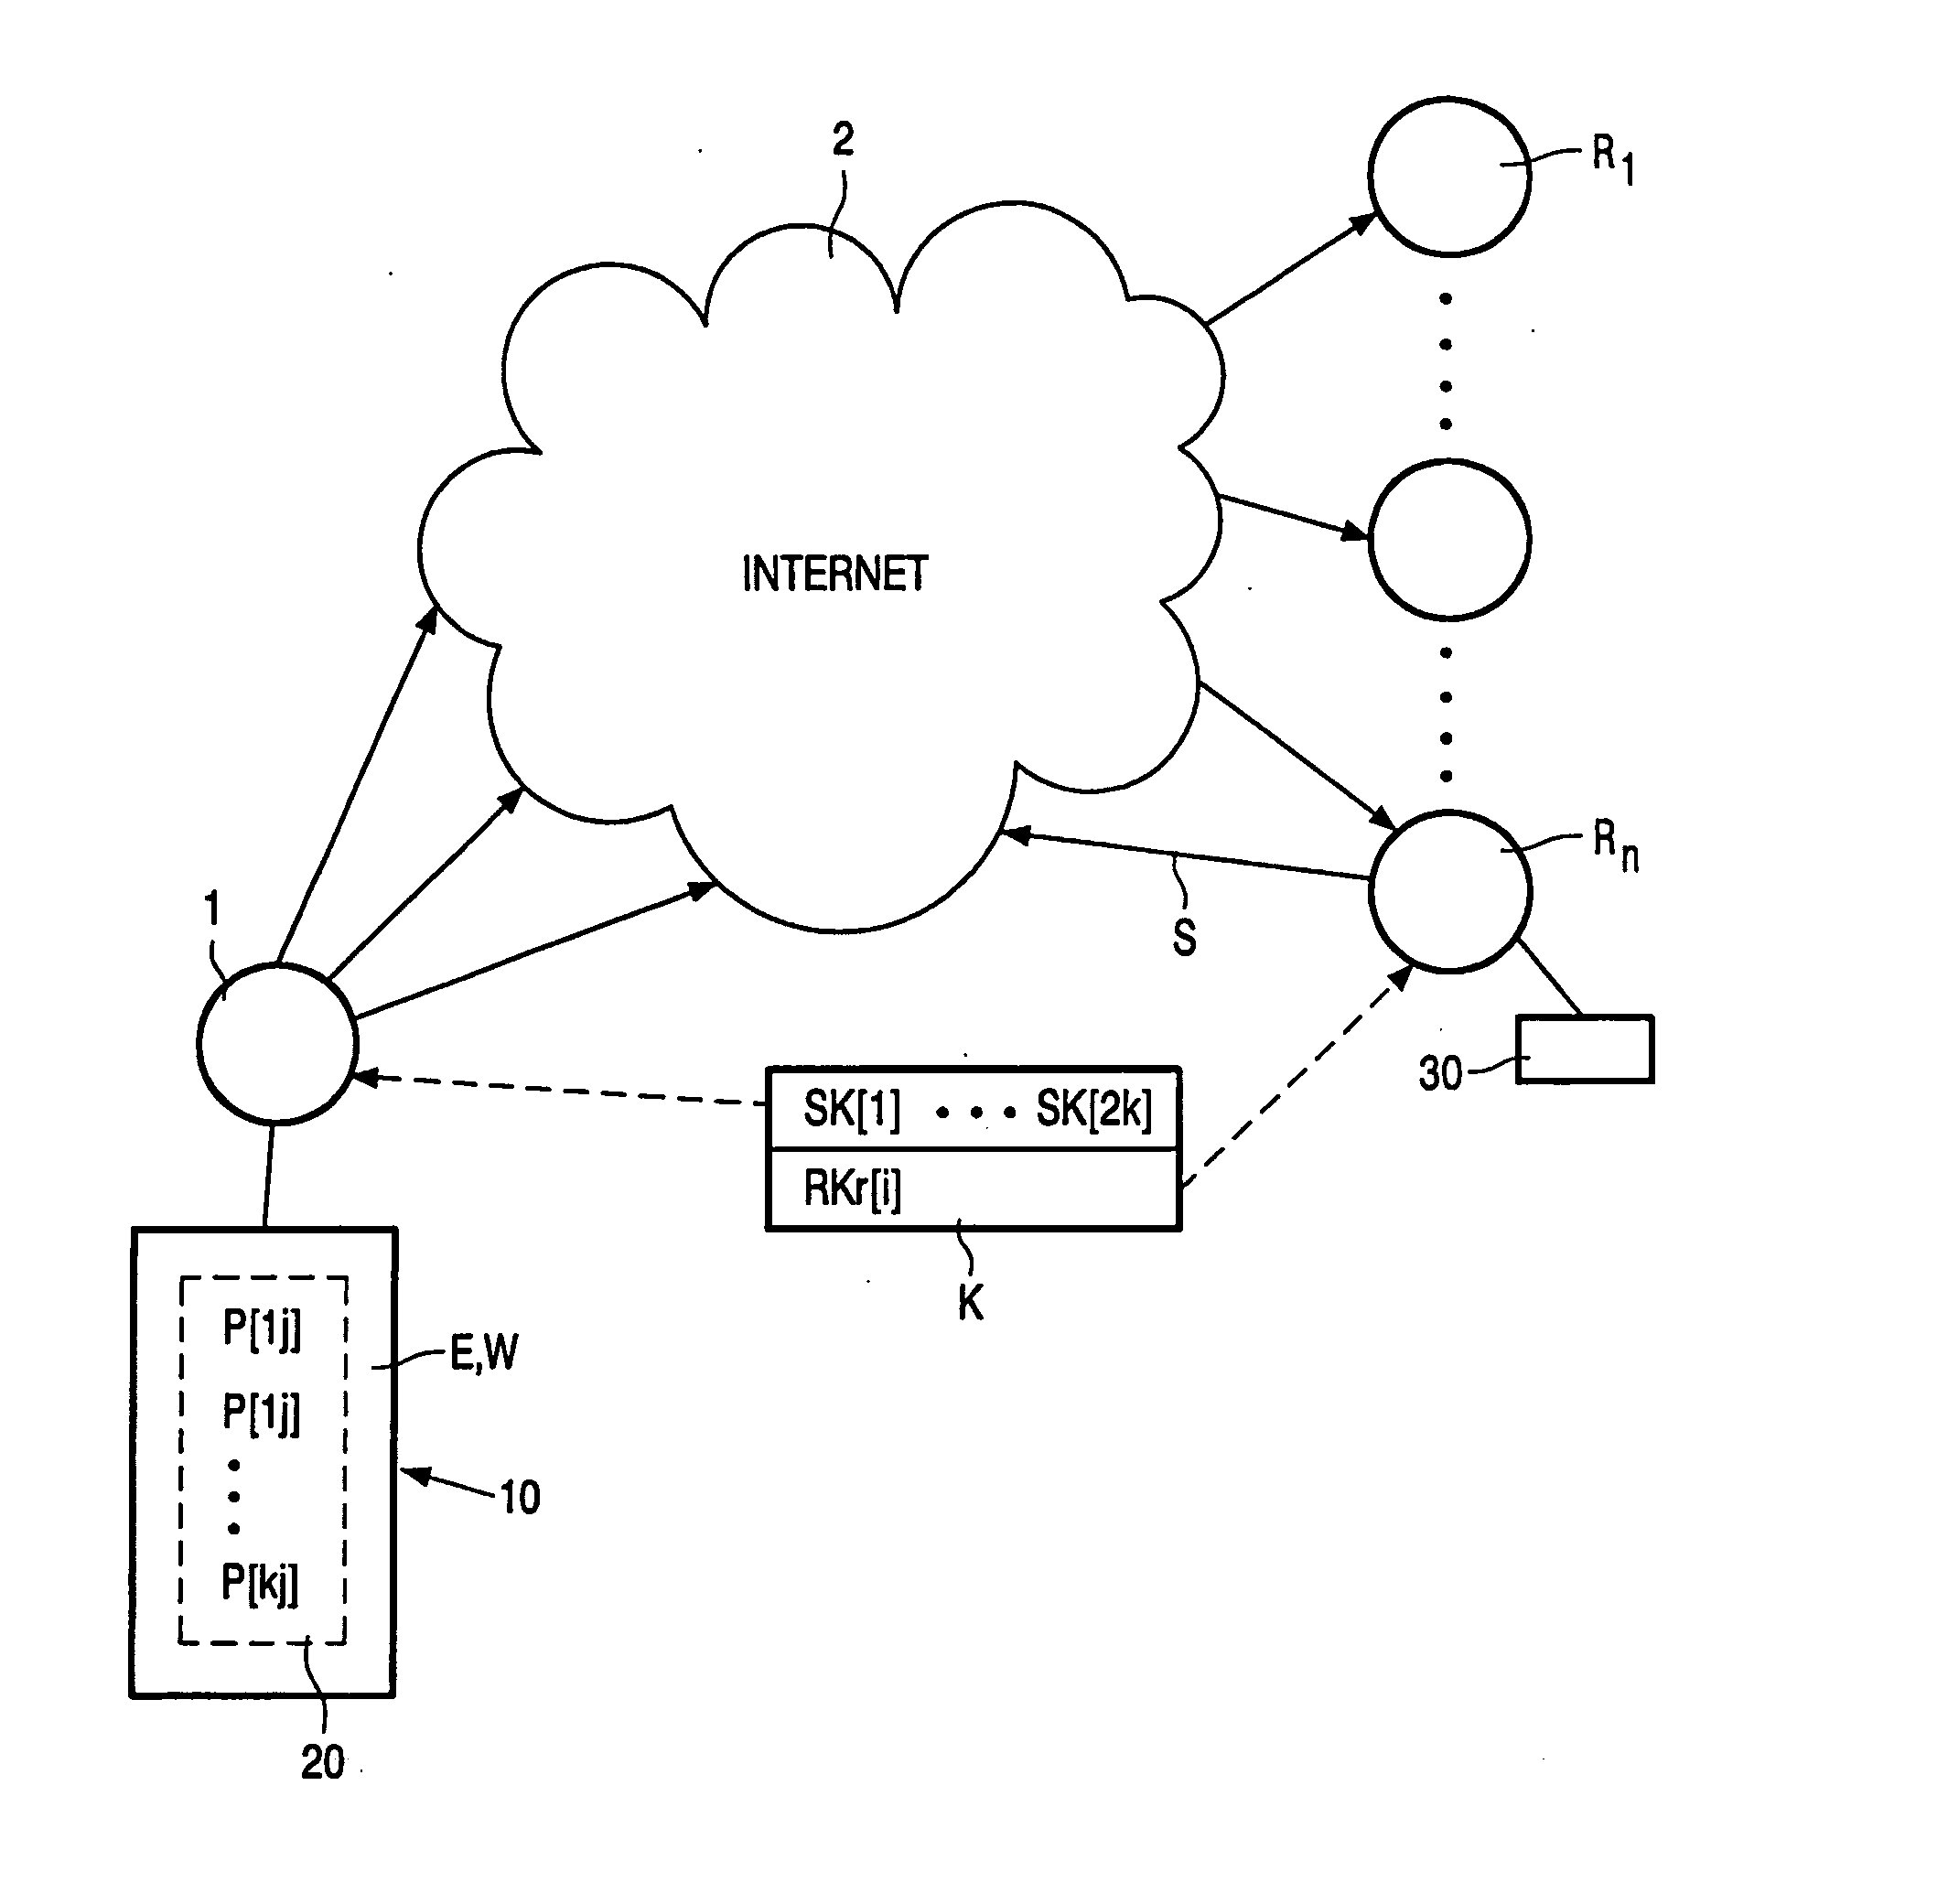 Generation of a watermark being unique to a receiver of a multicast transmission of multimedia